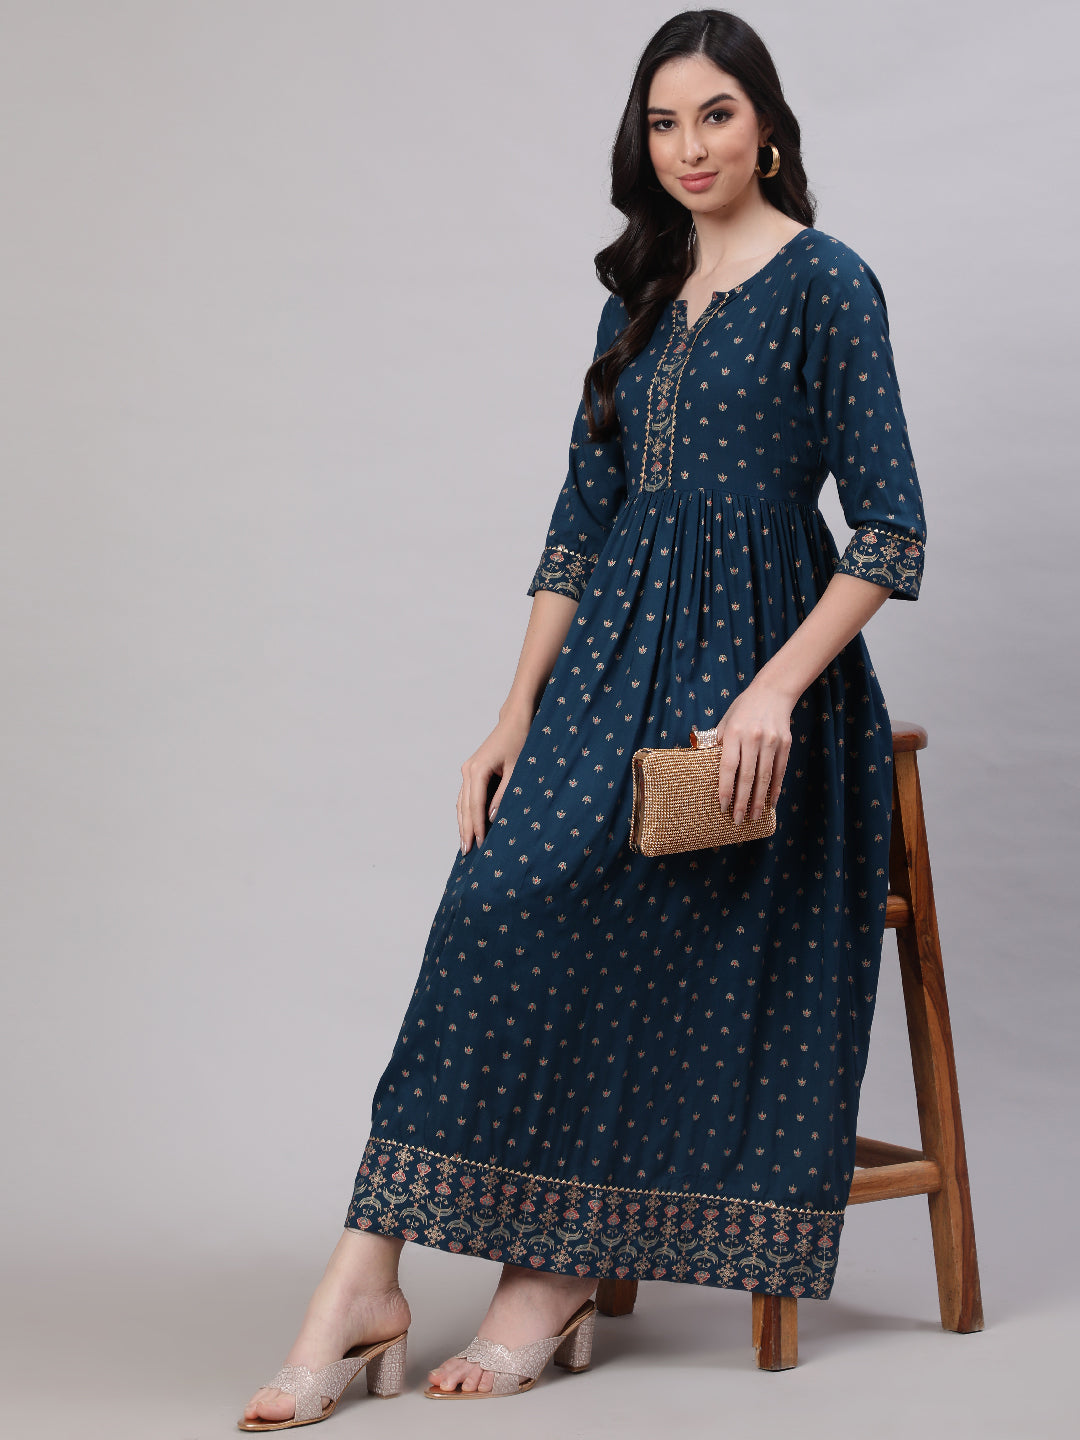 Women's Wome Teal Blue Ethinc Printed Flared Dress With Three Quarter sleeves - Nayo Clothing